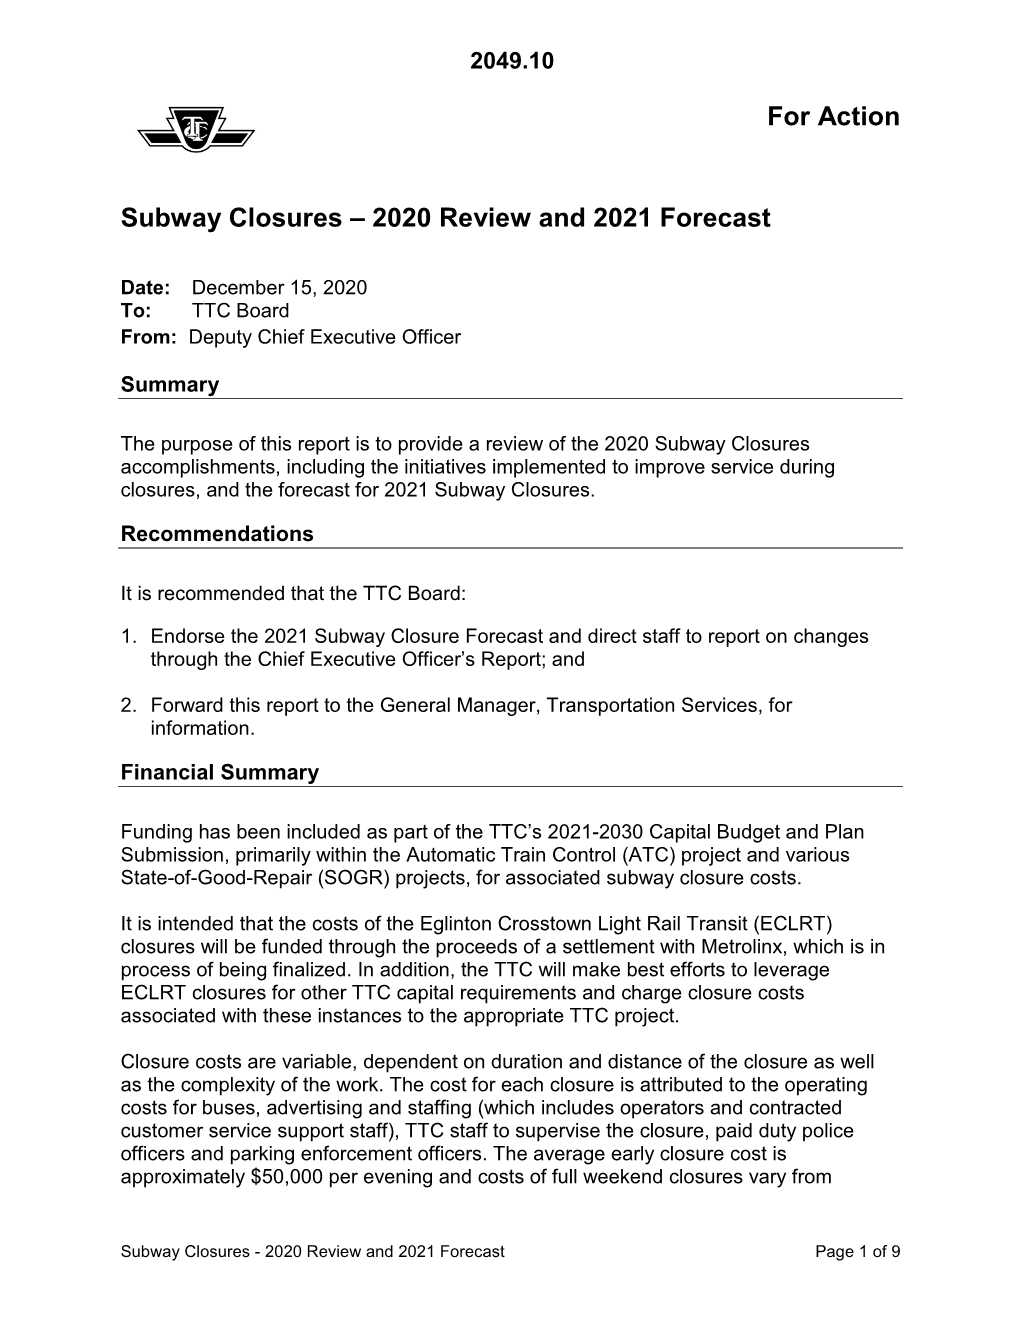 Subway Closures – 2020 Review and 2021 Forecast